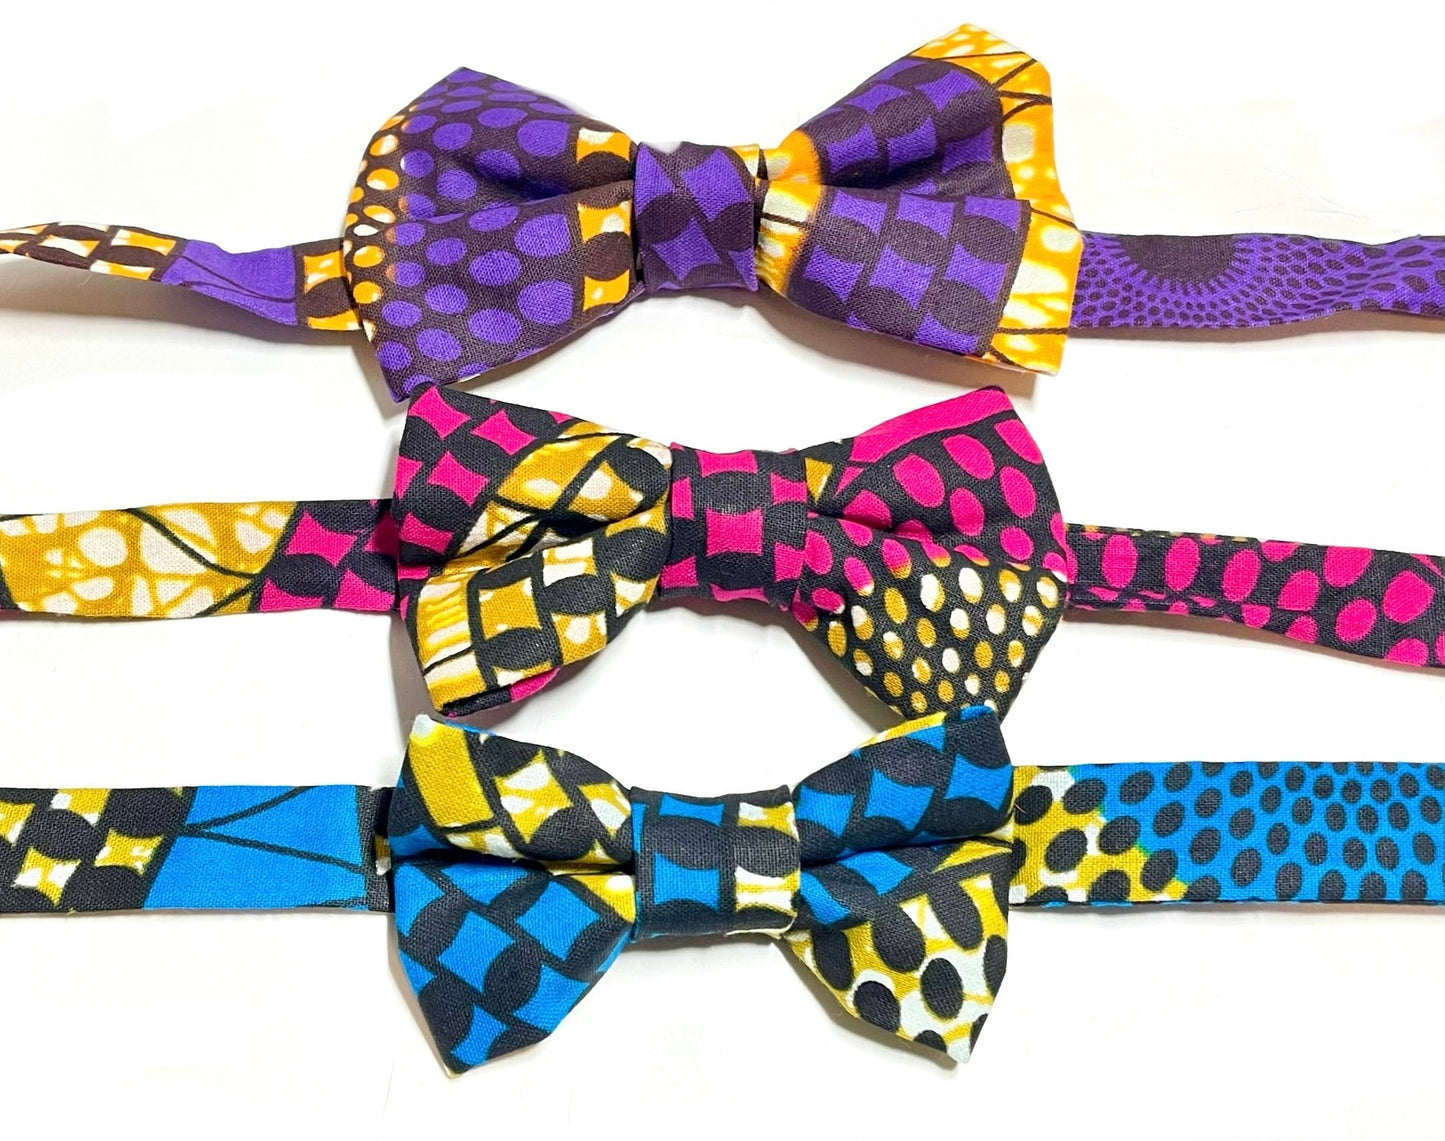 A selection of 3 African print bow ties. These bow ties are in the colors of fuchsia, purple and blue.